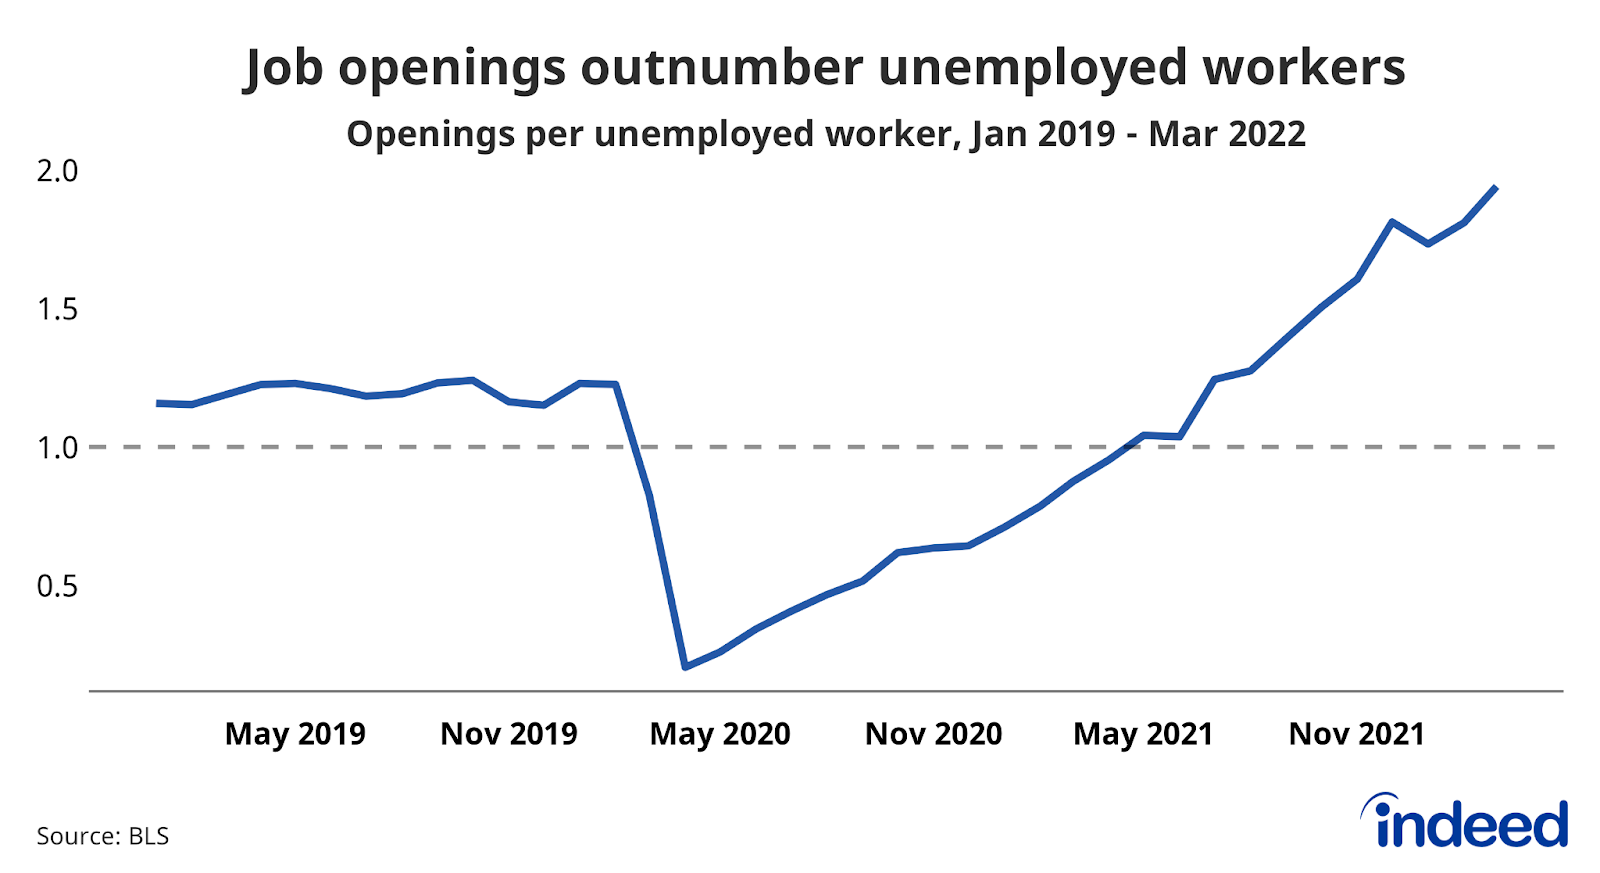 Line chart showing the openings per unemployeed worker, January 2019 to March 2022.